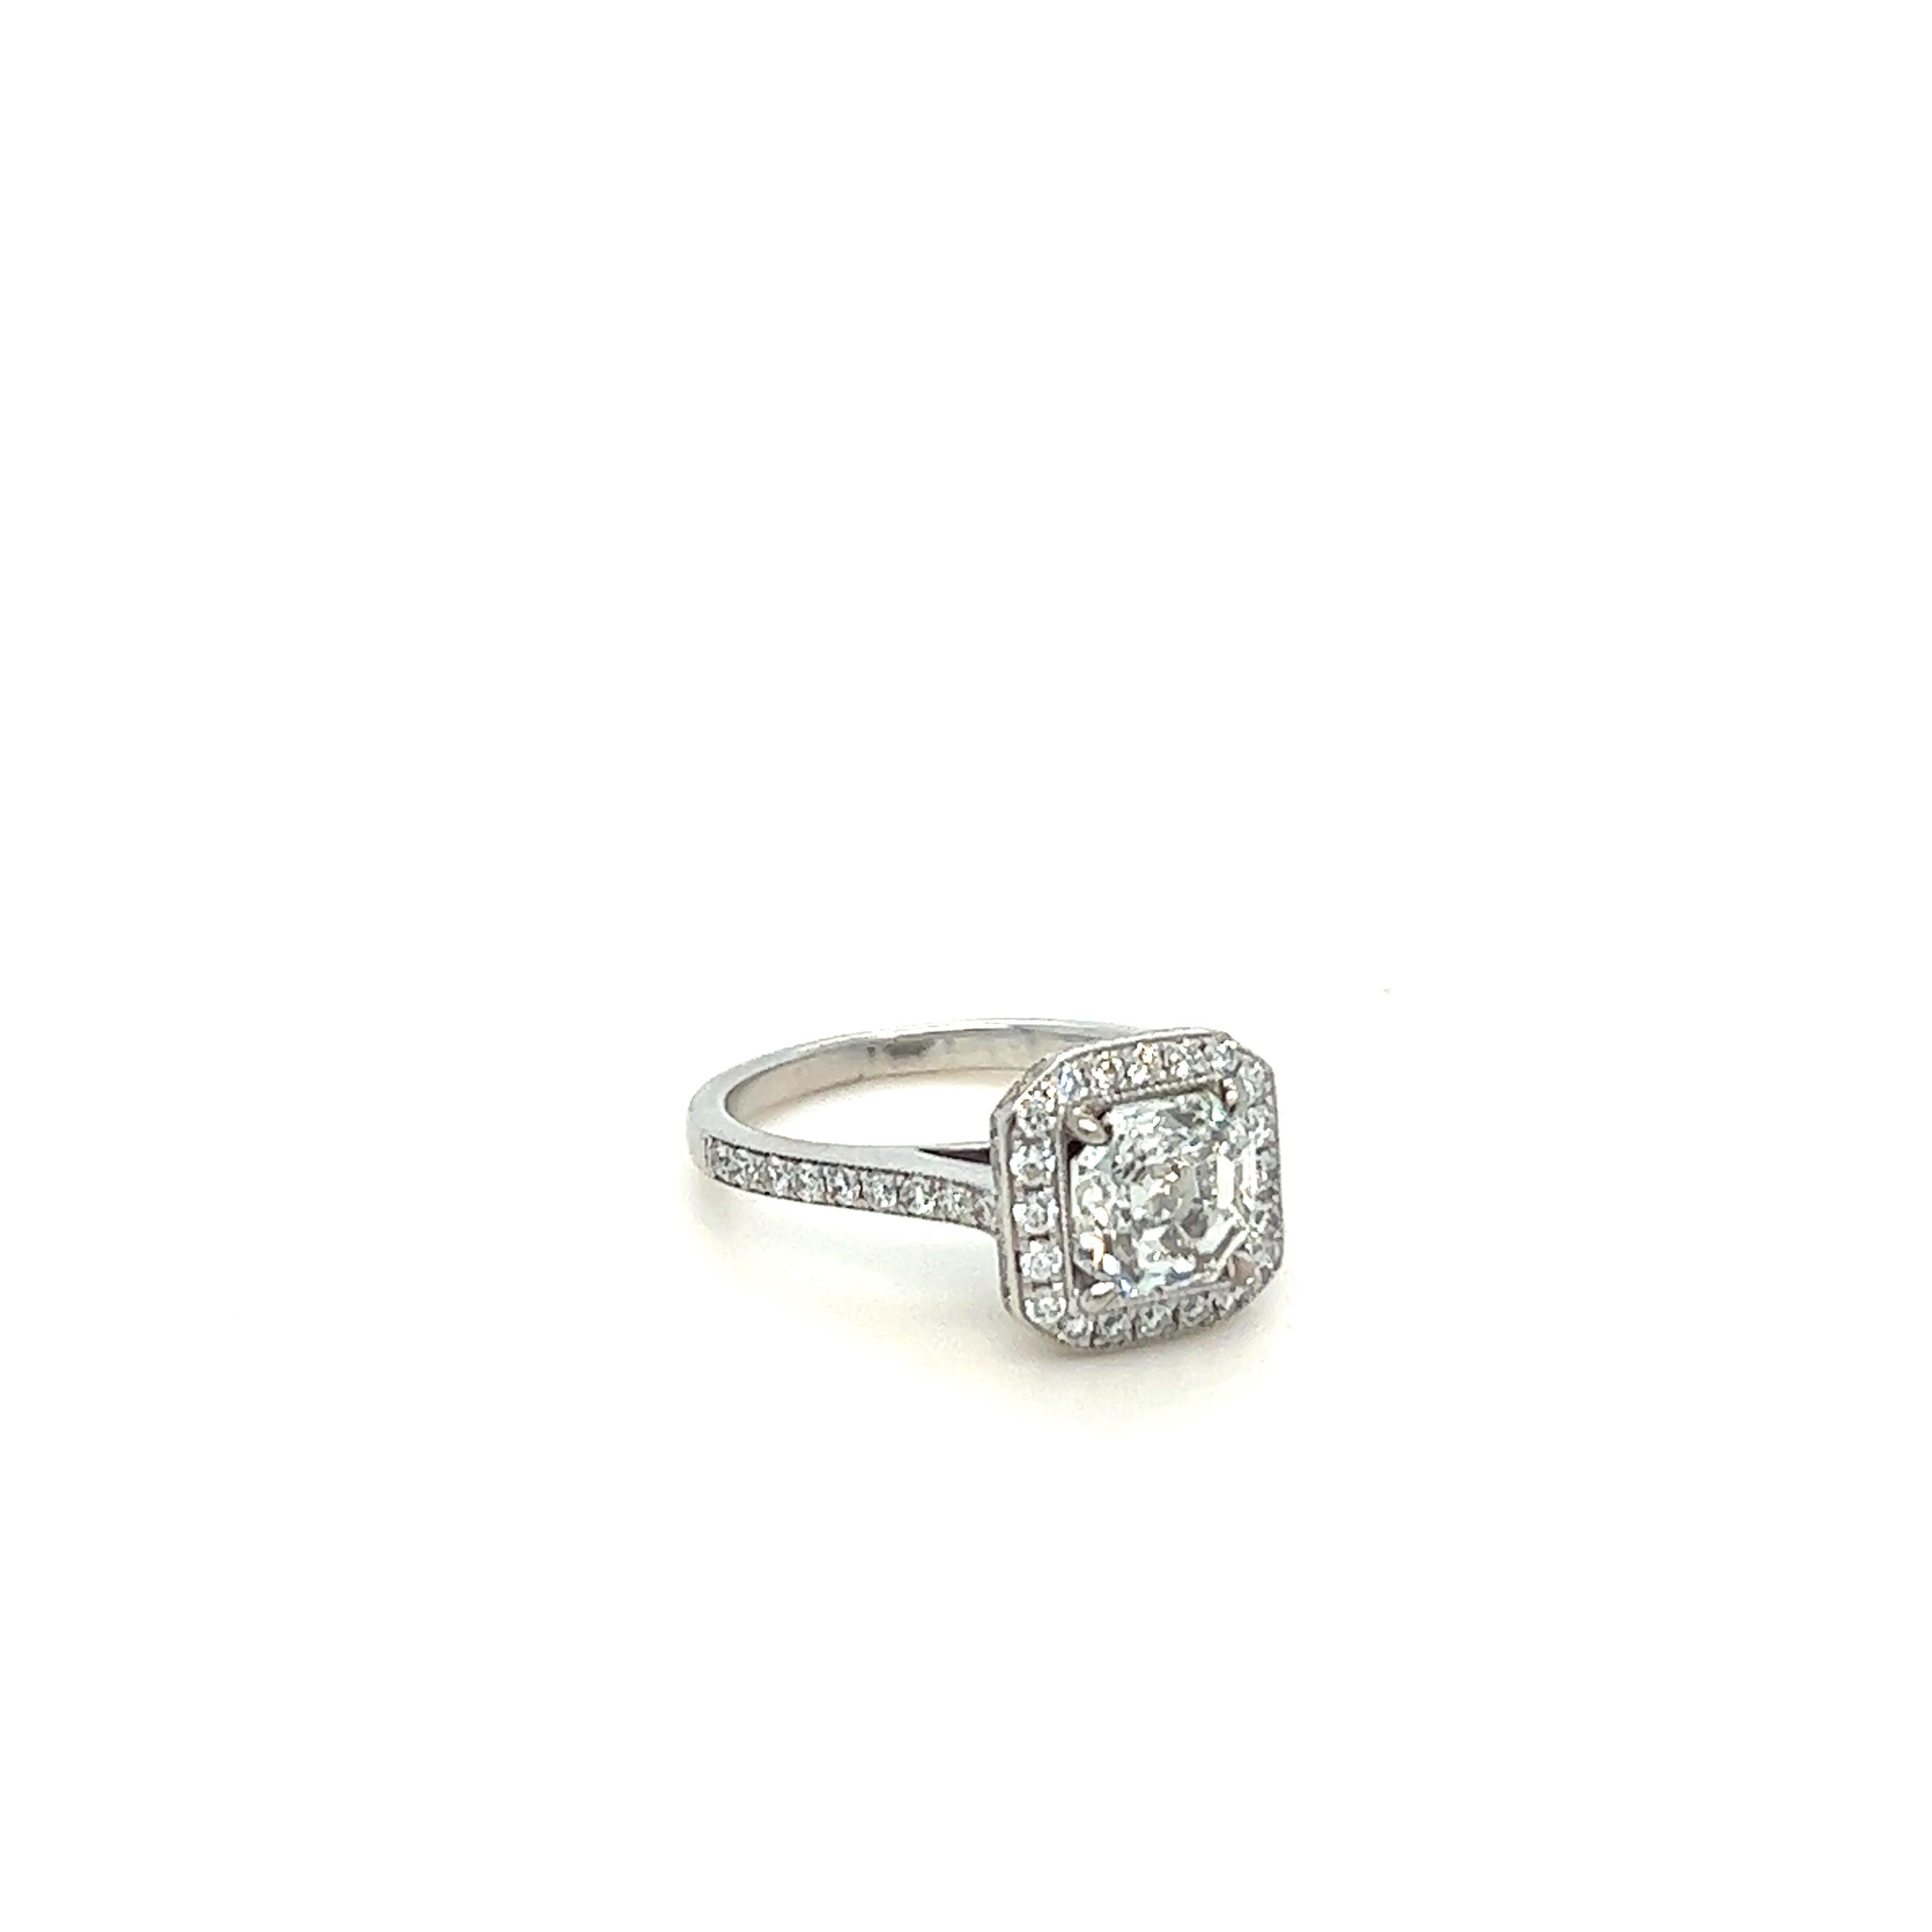 Unique features: 
GIA White Gold Asscher Cut Engagement Ring 1.56ct

18ct white gold, combination machine and handmade halo style diamond.

Surrounding the central Asscher cut diamond, in a bead set frame, are twenty round brilliant cut diamonds,